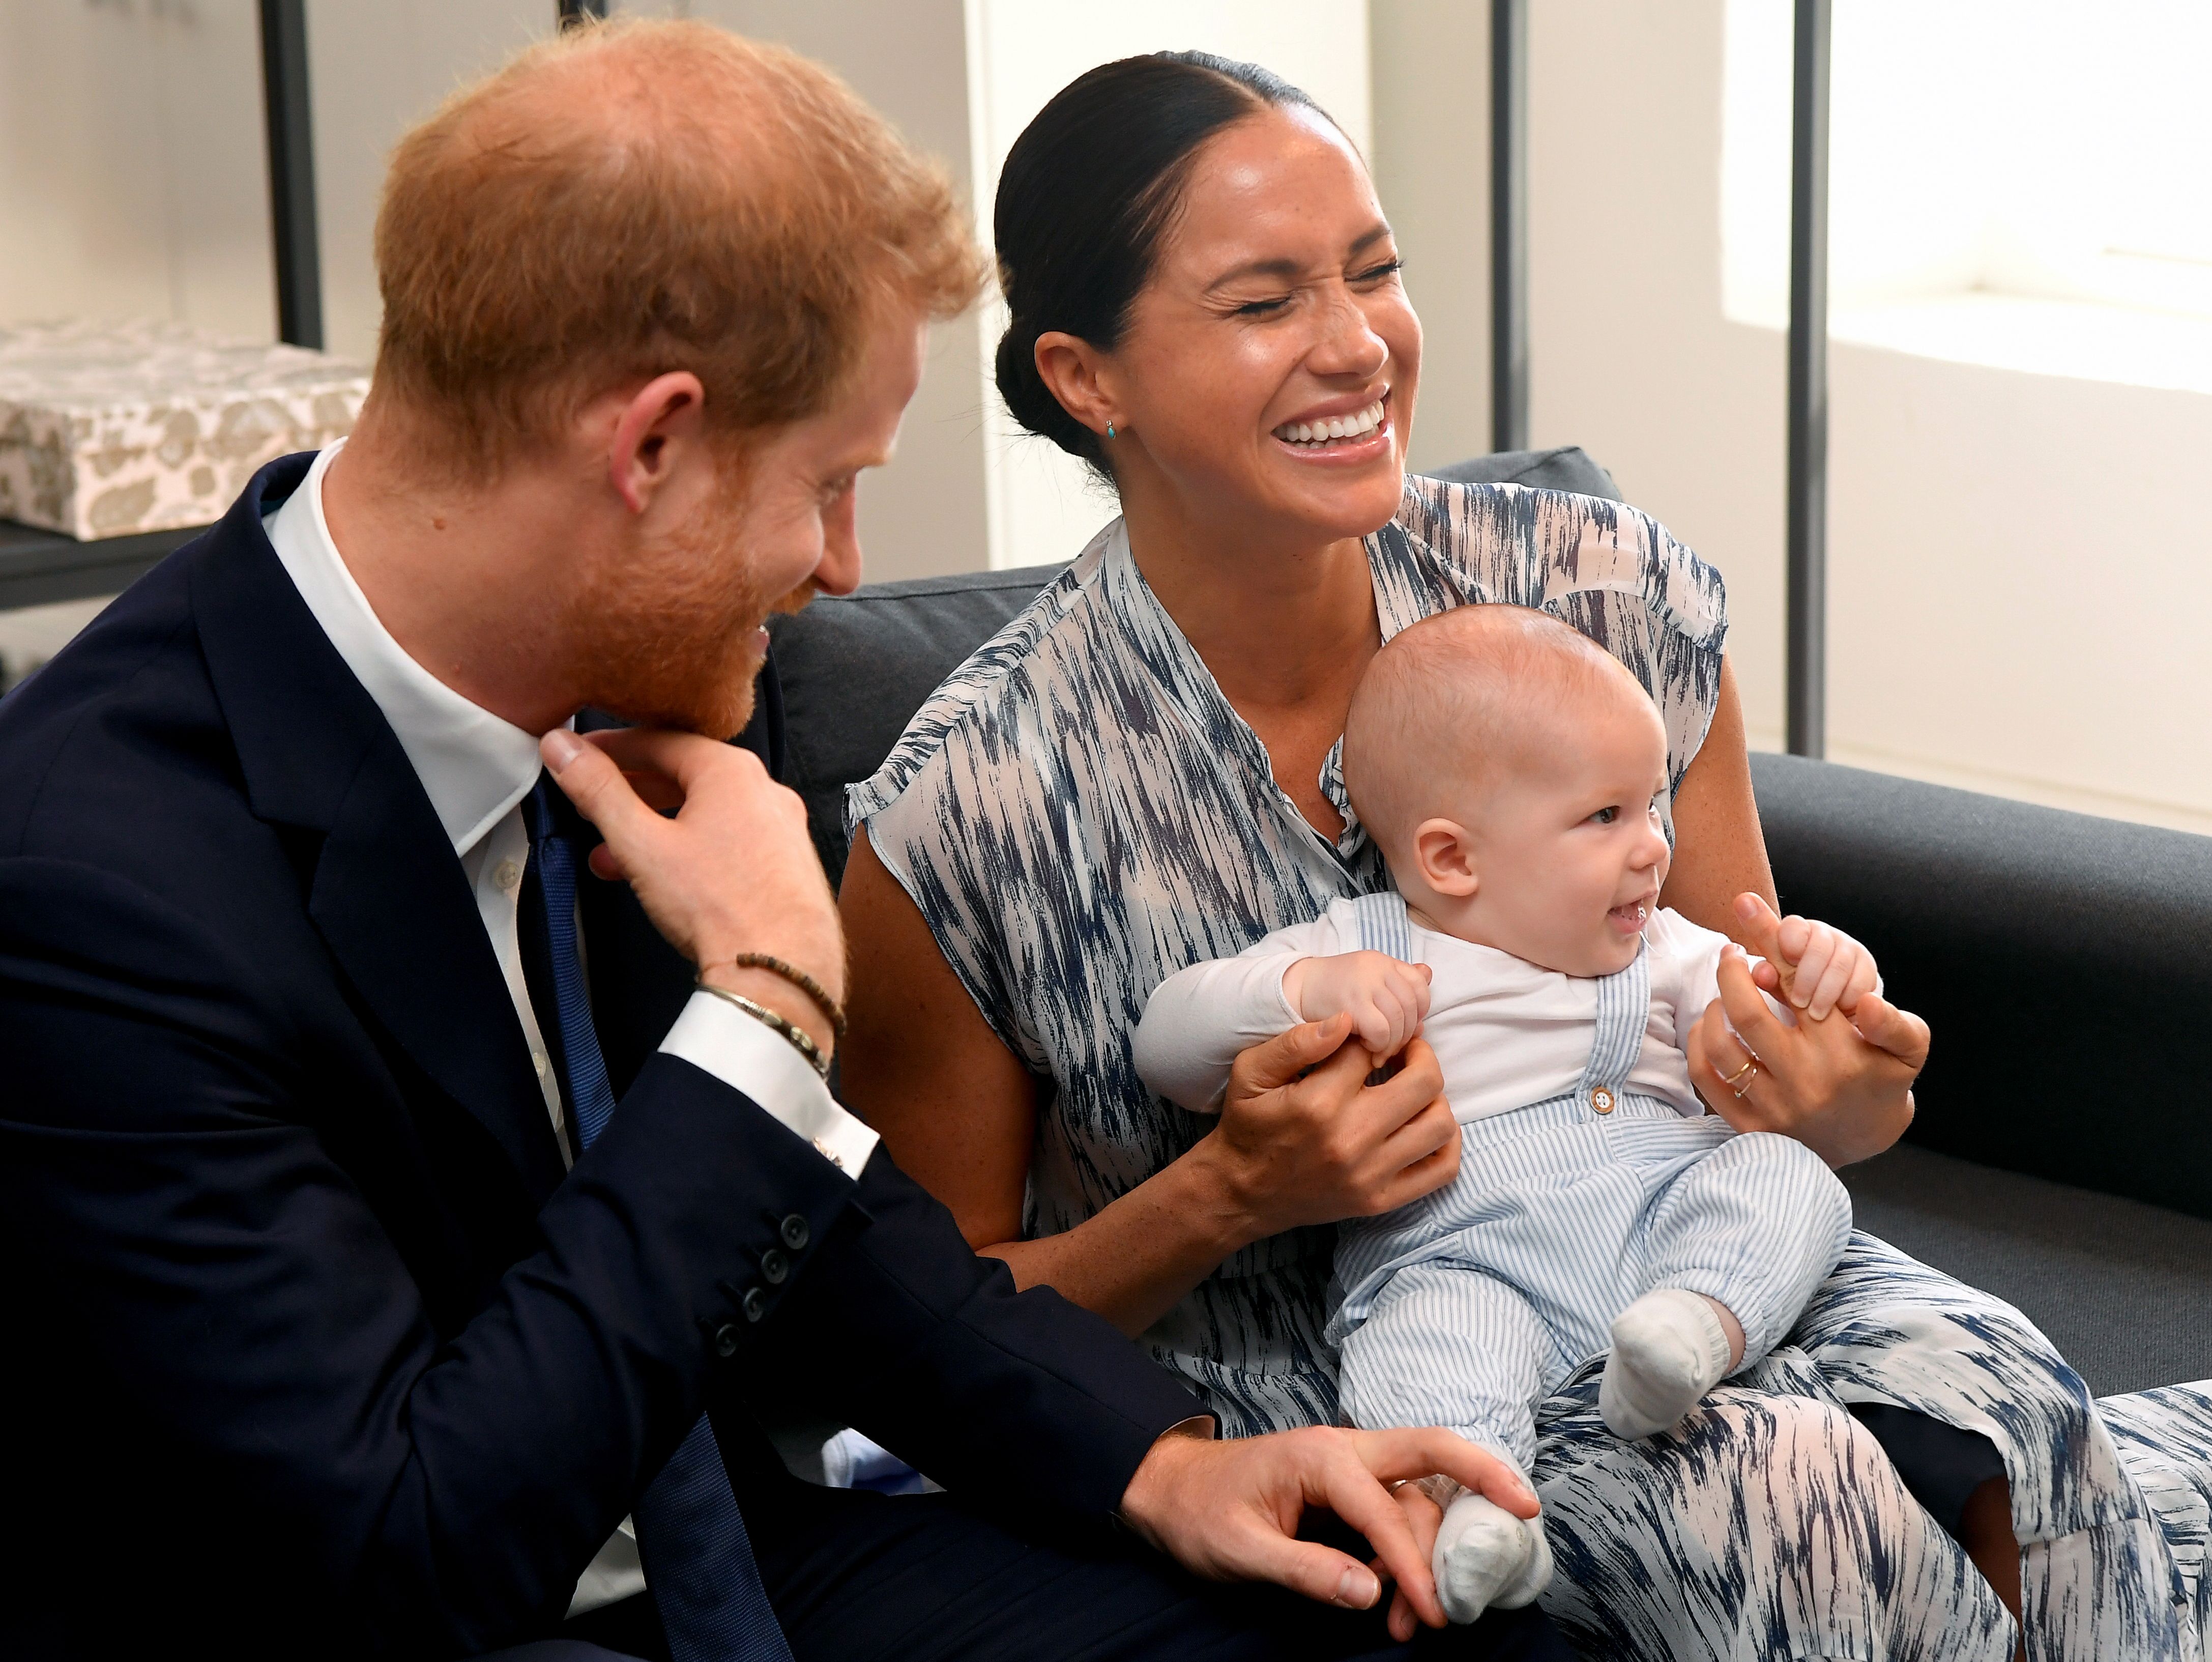 Prince Harry, Meghan Markle and their son Archie Mountbatten-Windsor at the Desmond & Leah Tutu Legacy Foundation in Cape Town, South Africa | Photo: Toby Melville - Pool/Getty Images